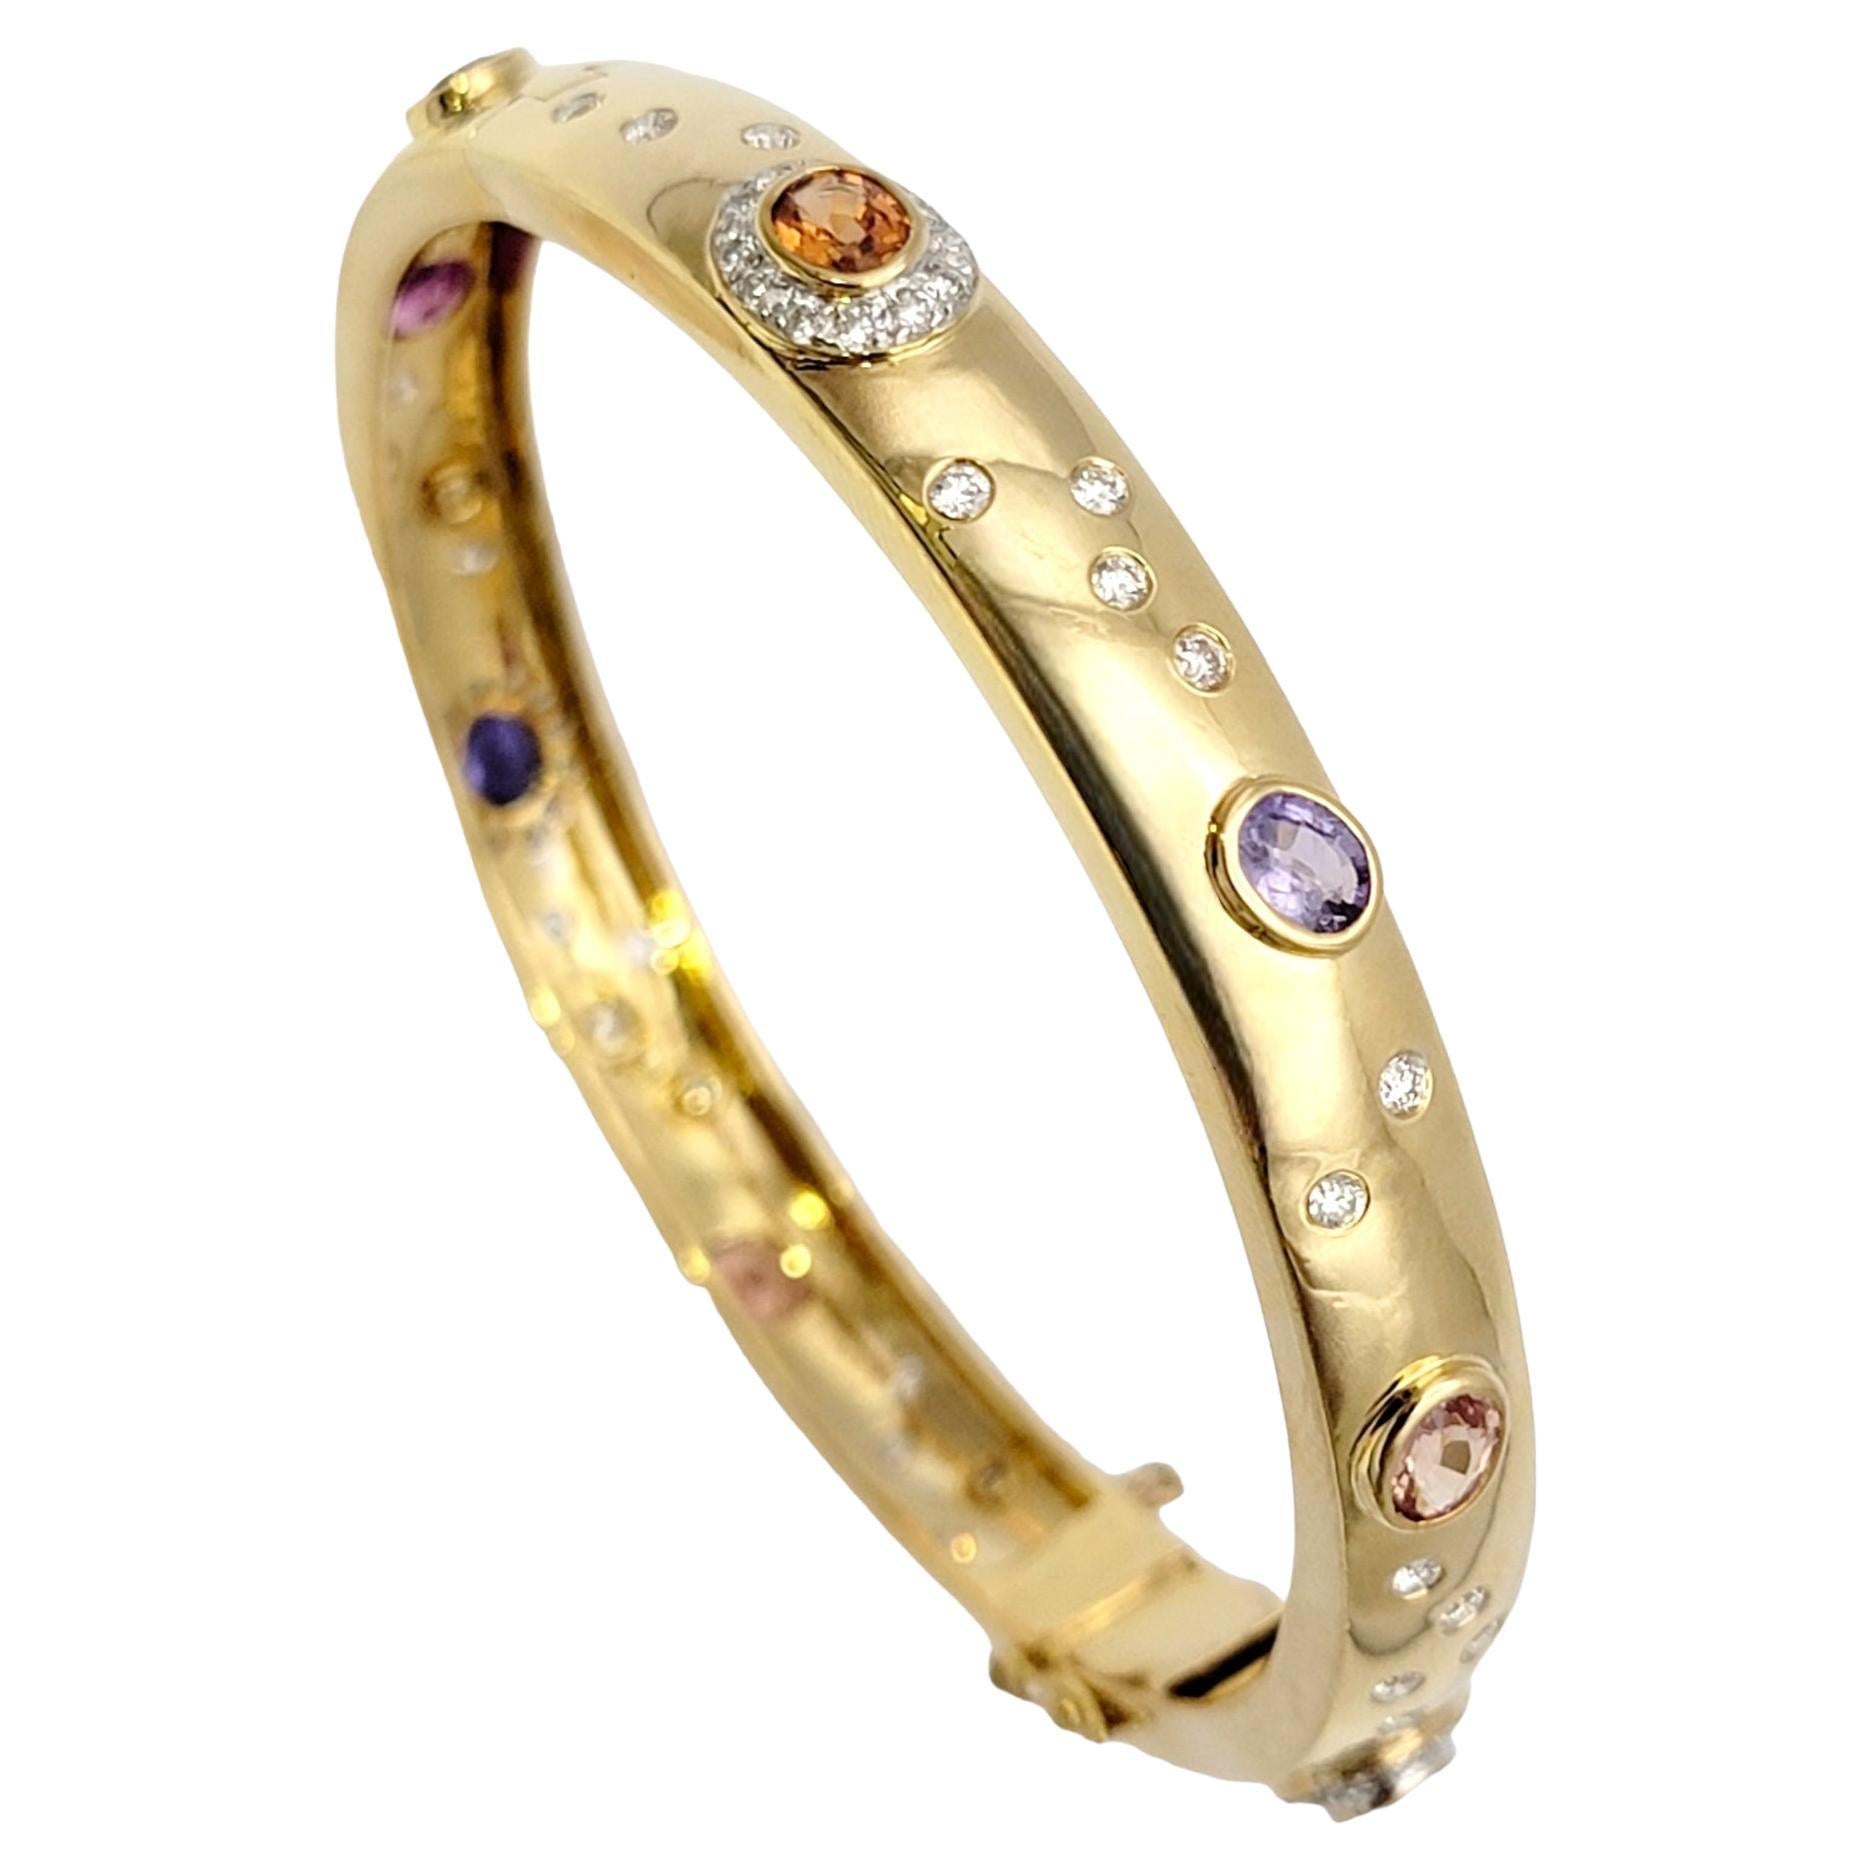 You will absolutely fall in love with this luxurious and captivating bangle bracelet adorned with radiant diamonds and mesmerizing multi-colored sapphires. Crafted with meticulous attention to detail, this enchanting piece embodies elegance,